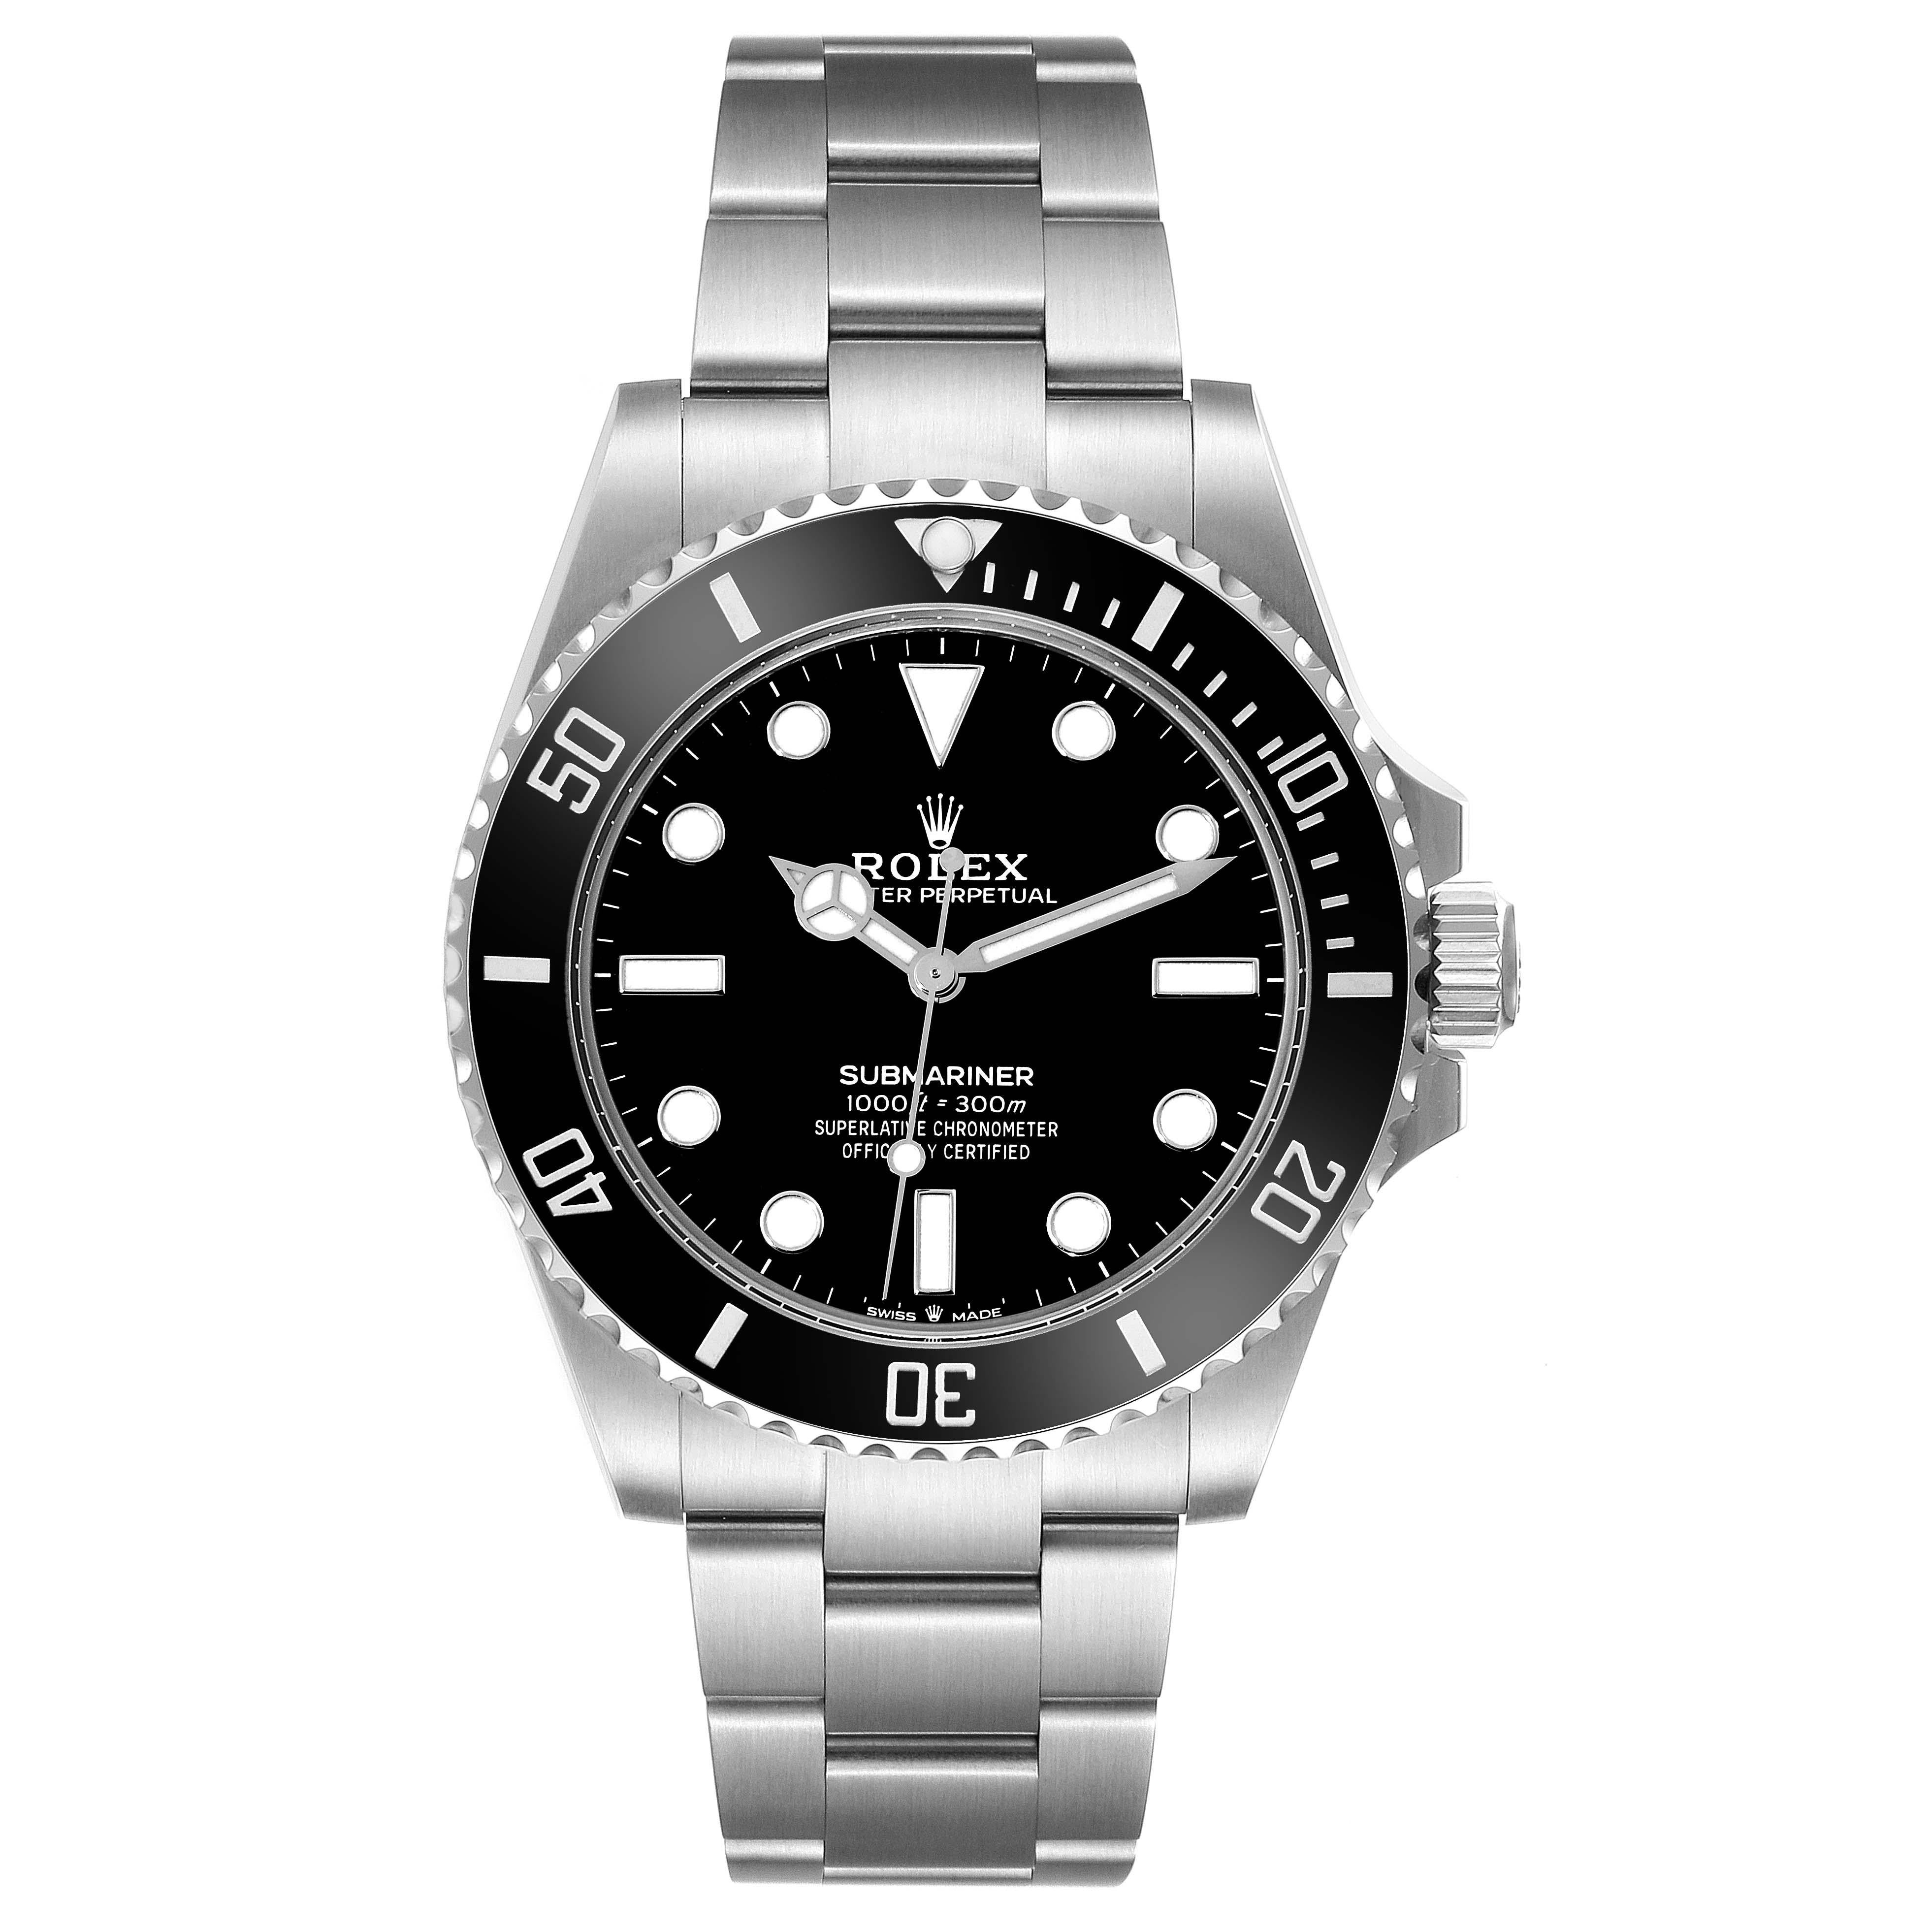 Rolex Submariner Non-Date Ceramic Bezel Steel Mens Watch 124060 Box Card. Officially certified chronometer automatic self-winding movement. Stainless steel case 41.0 mm in diameter. Rolex logo on the crown. Special time-lapse unidirectional rotating